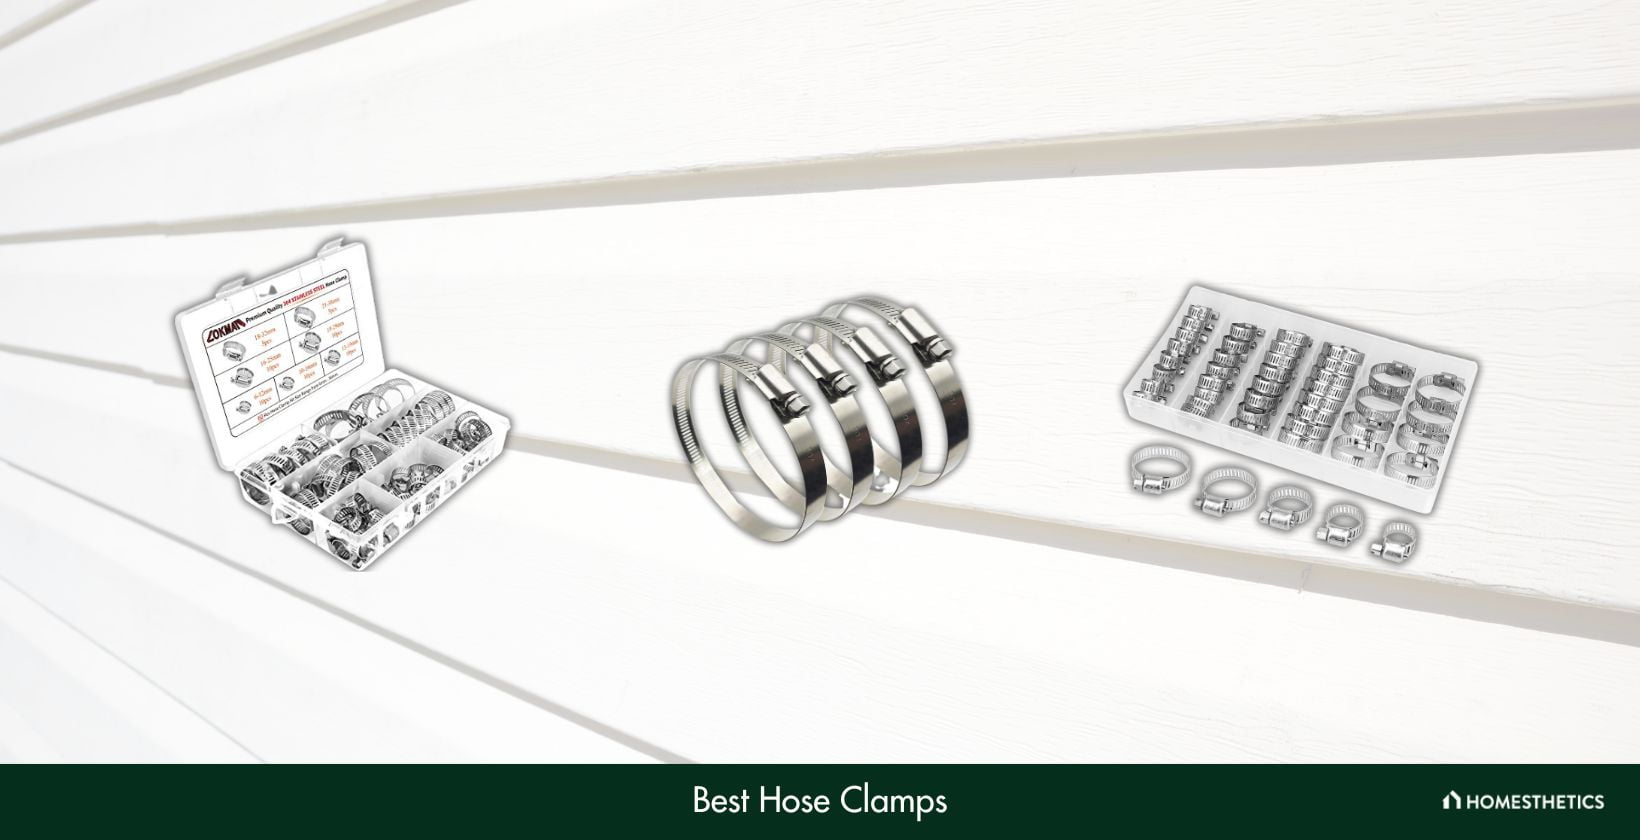 Best Hose Clamps